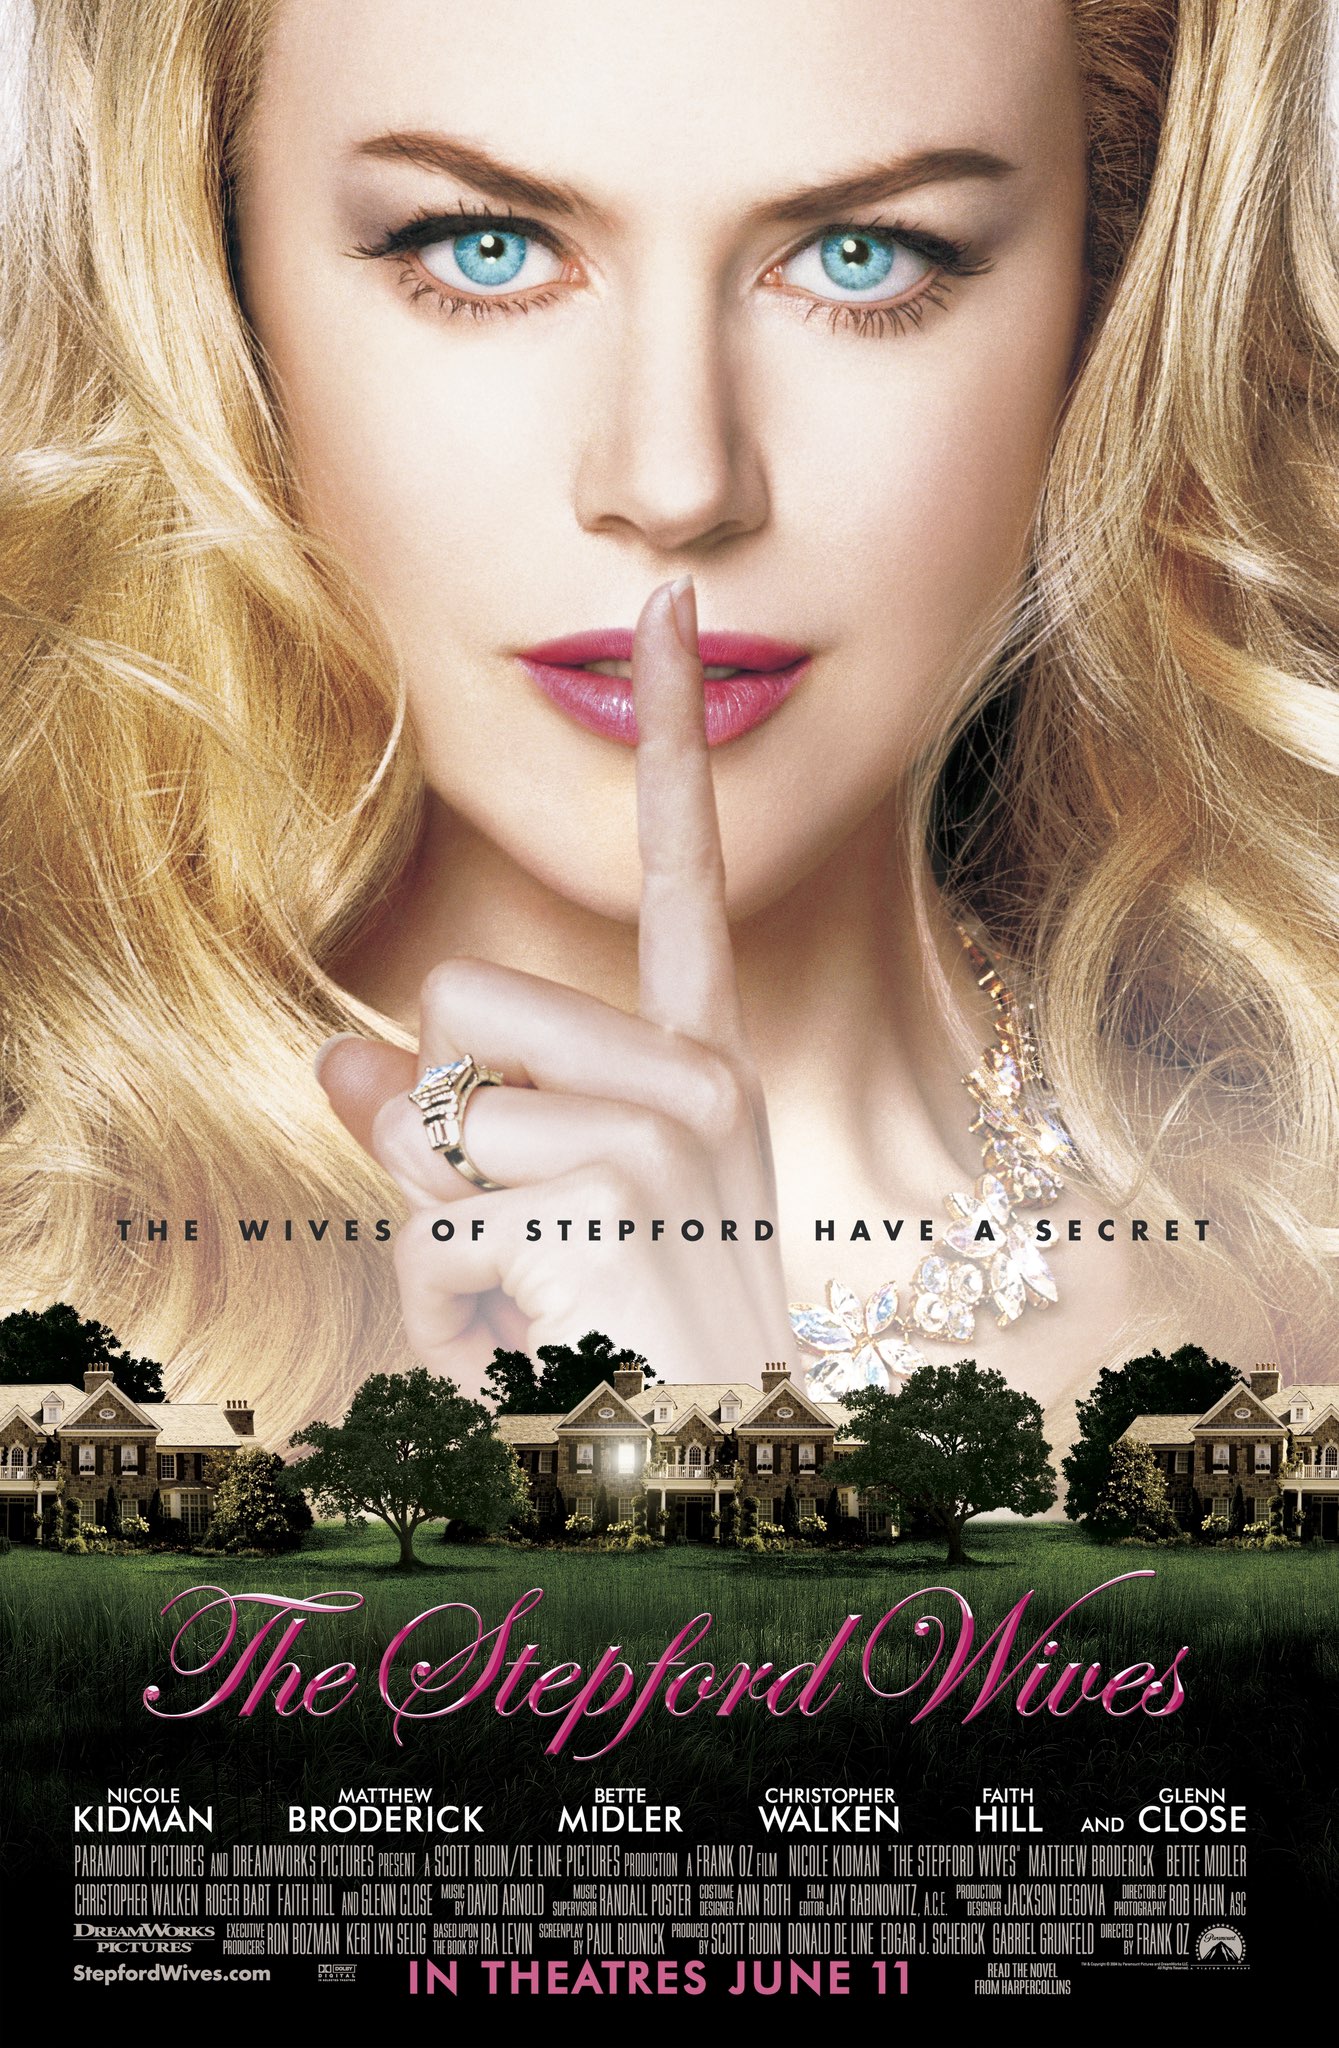 The Stepford Wives - Preview Cut - The Stepford Wives (found preview cut of black comedy sci-fi film; 2003)